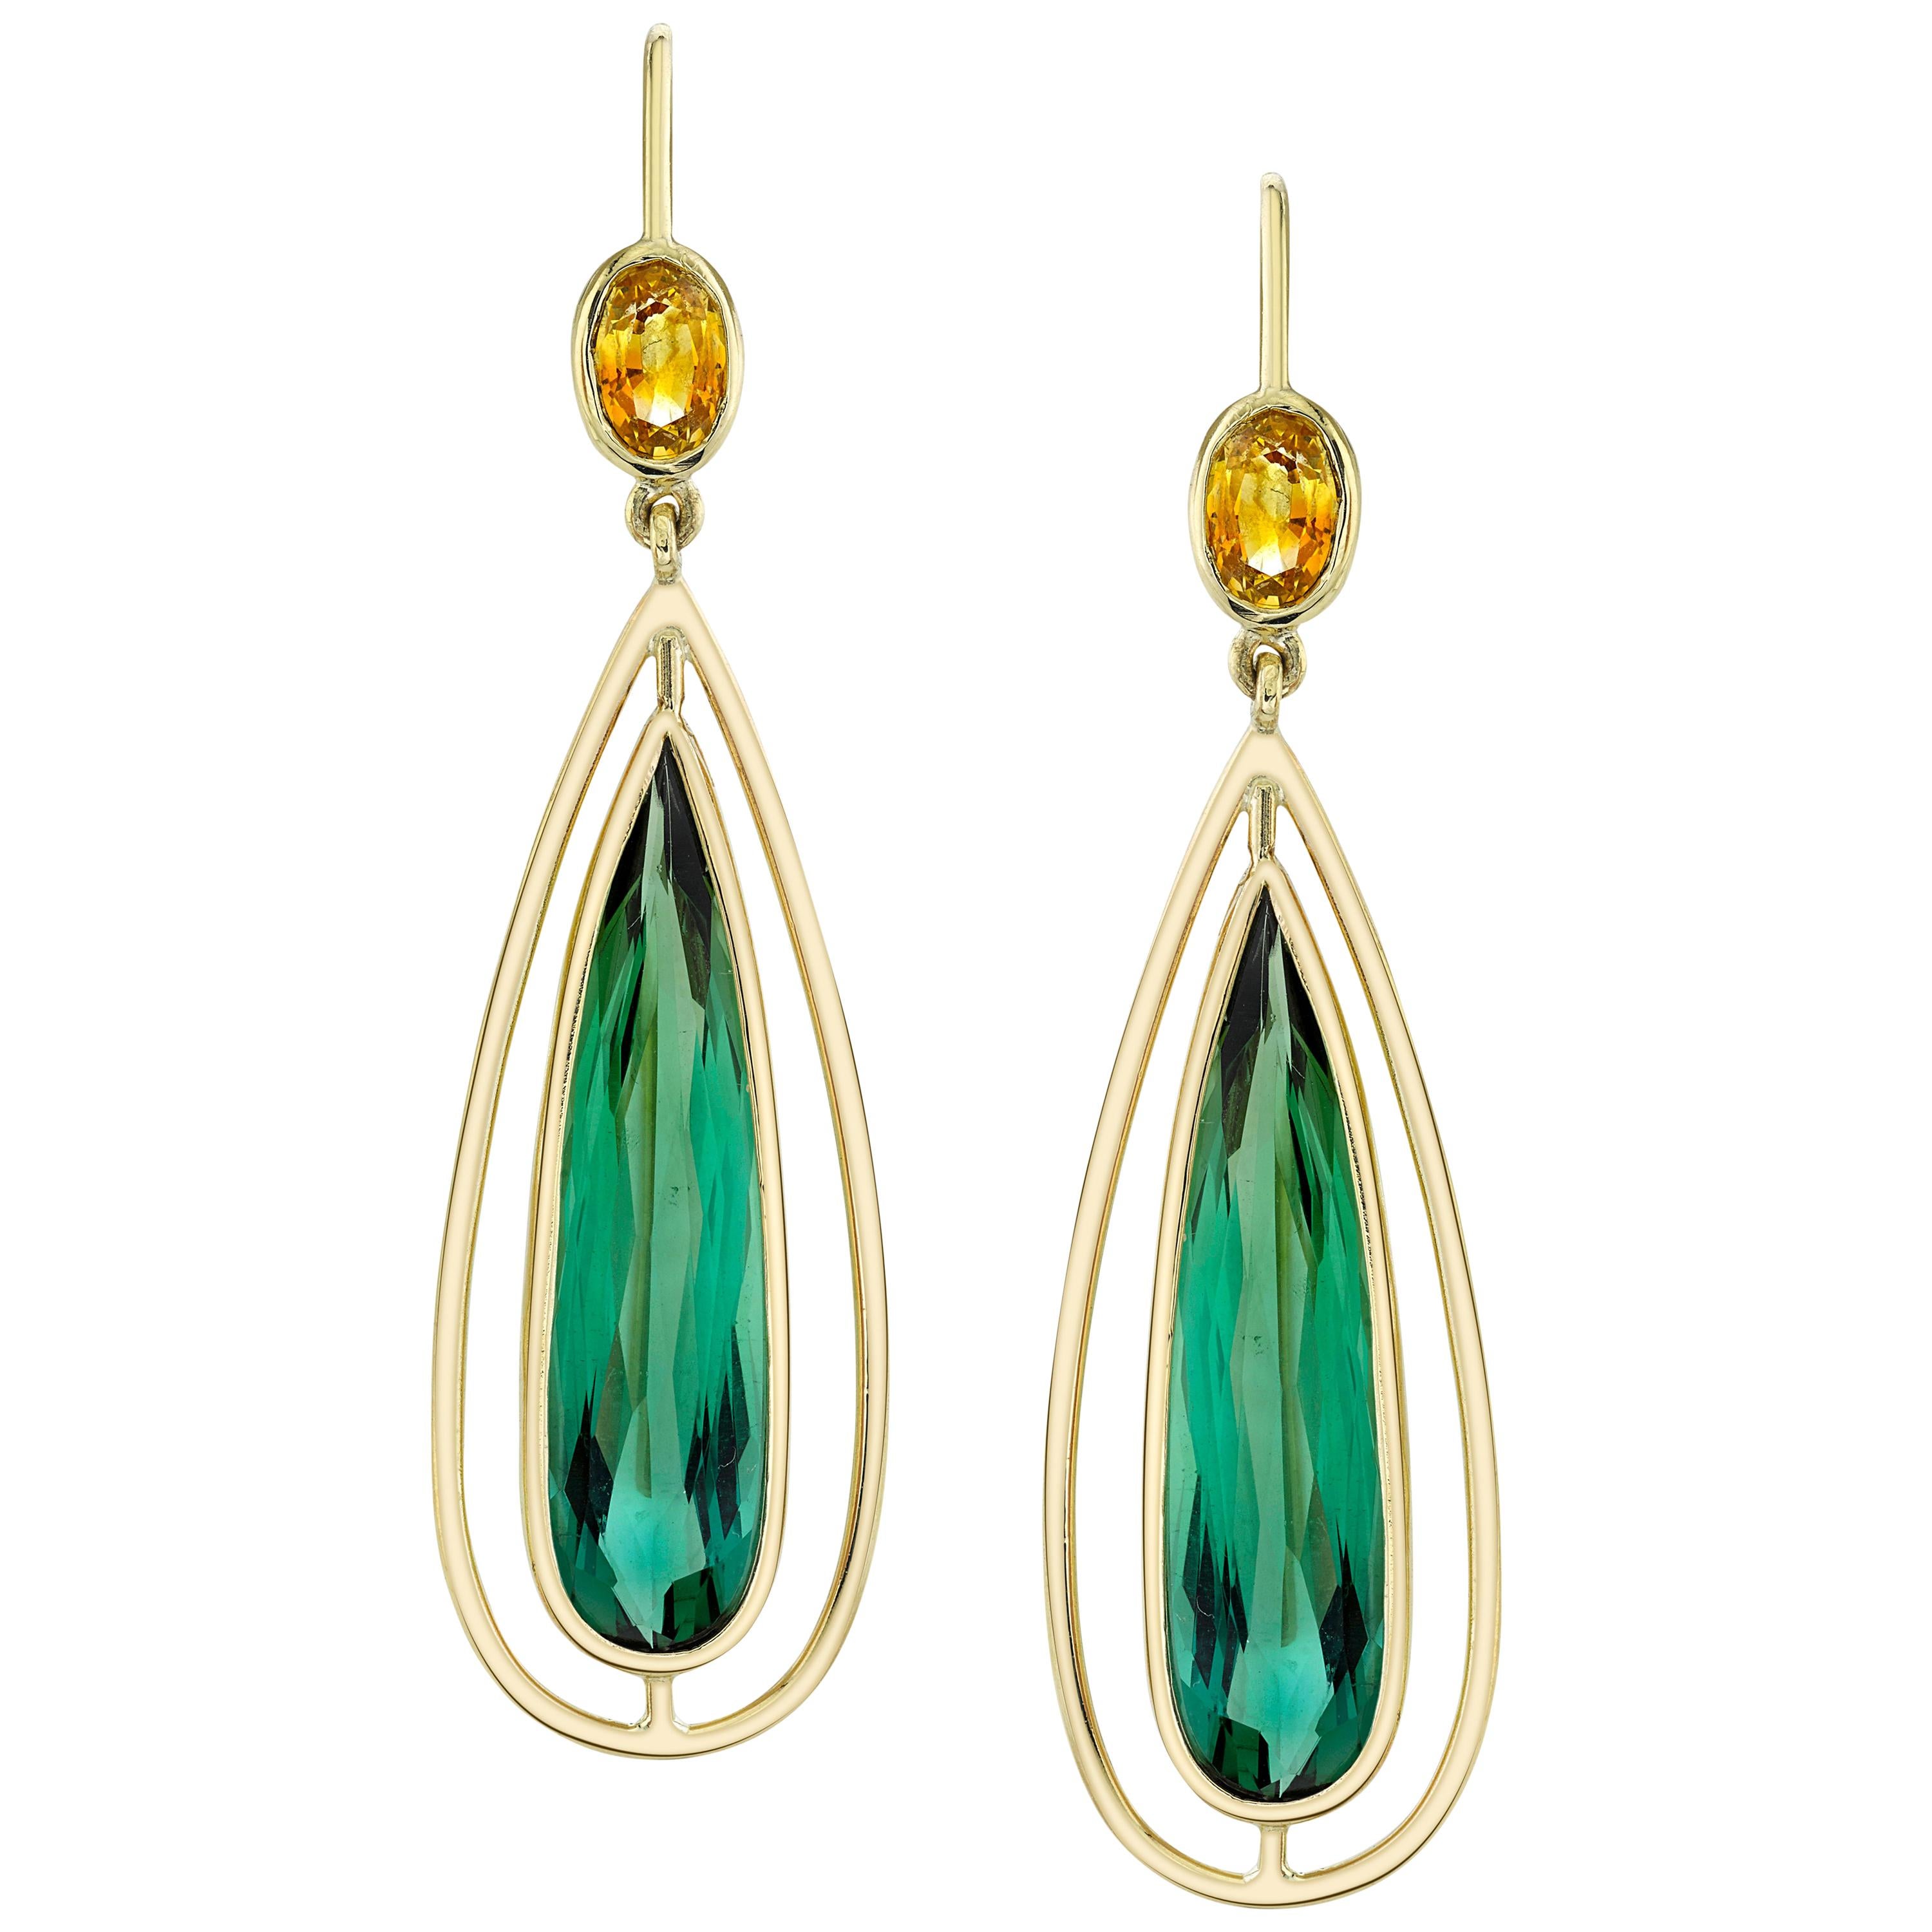  Green Tourmaline and Yellow Sapphire Dangle Earrings with Yellow Gold Halos